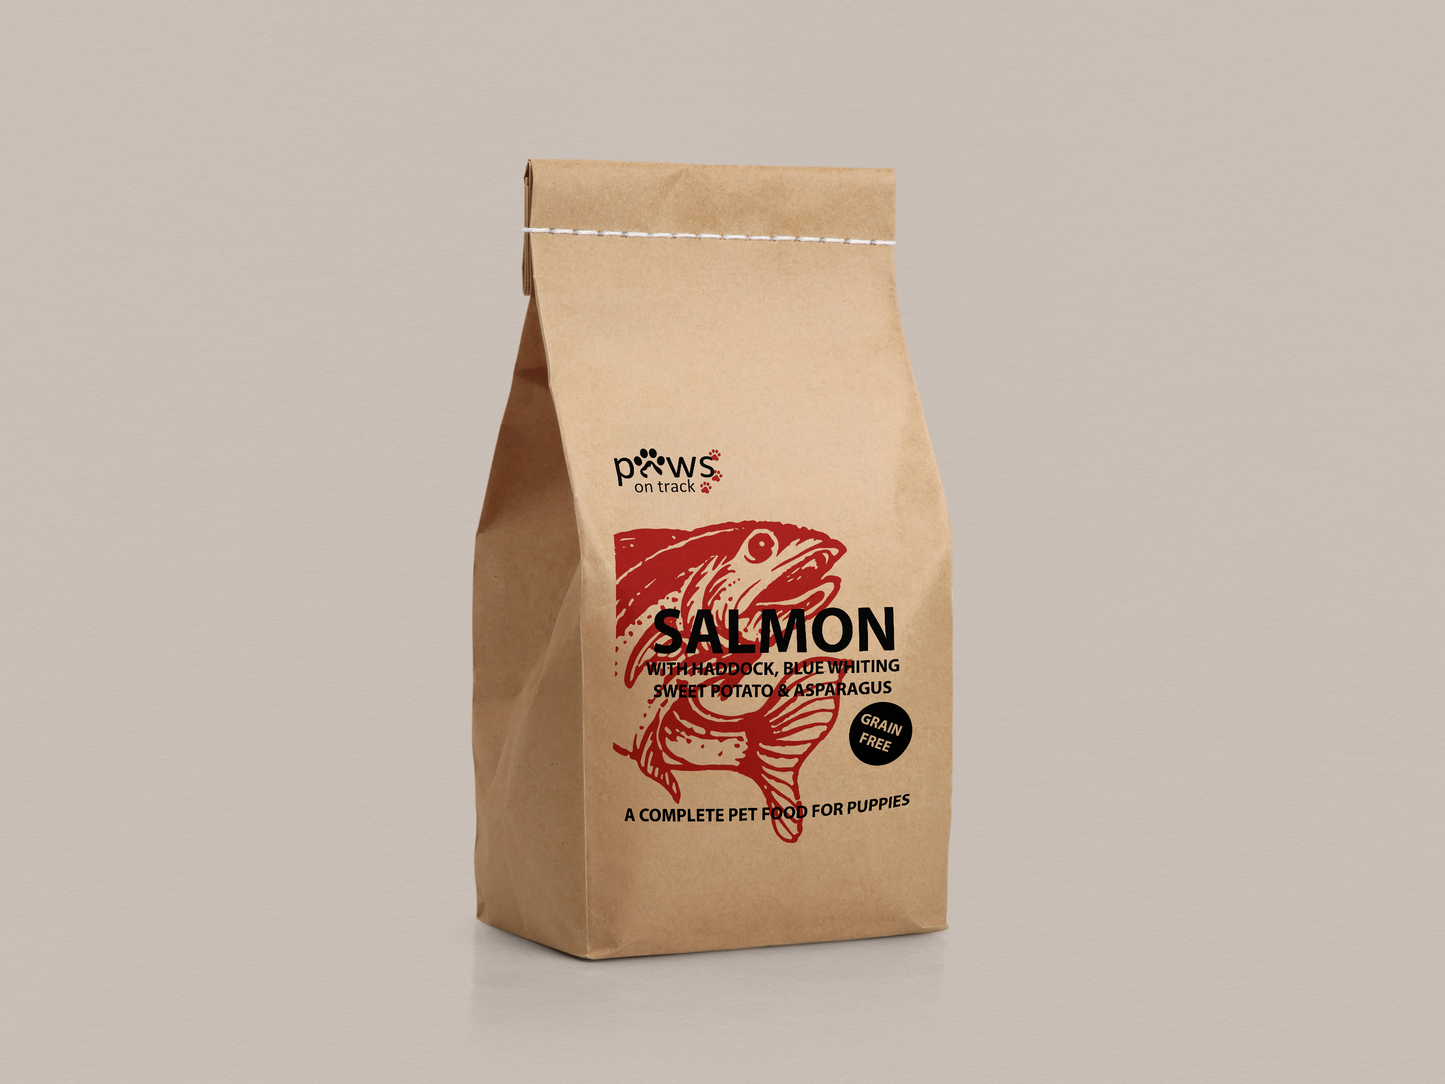 Salmon Dry Food (Puppy) - 12KG by Paws on Track